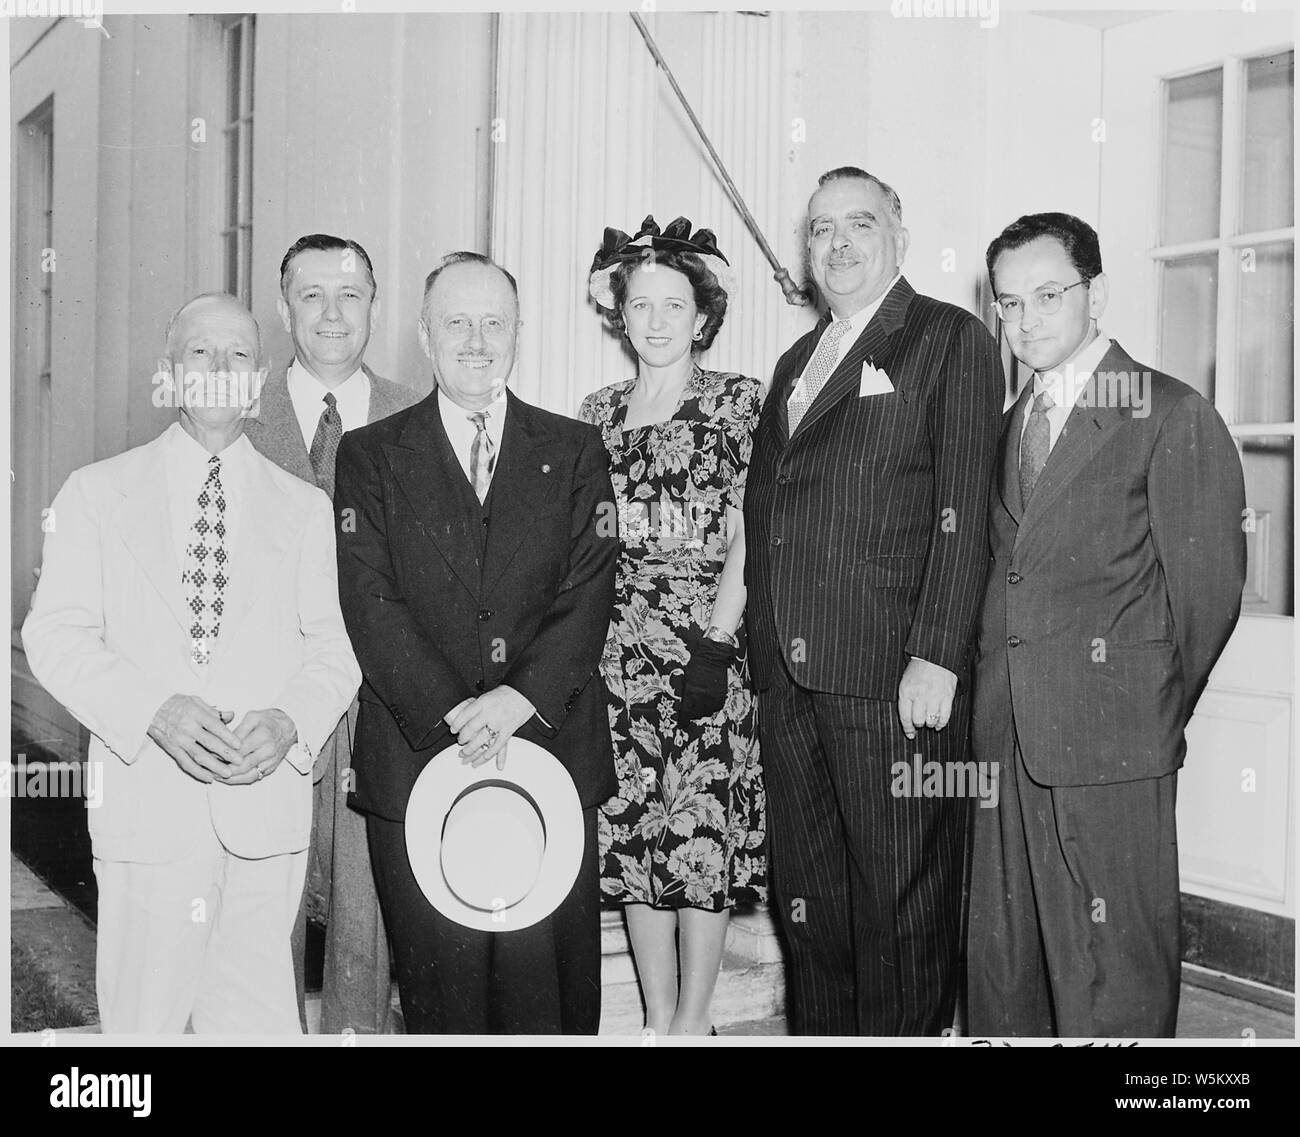 Delegation outside the White House attending the bill signing to make the governership of Puero Rico an elected office. L to R: Irving Silverman, Oscar Chapman, Isrin A. Fernus, unidentified lady, Jesus T. Pinero, and Fred Crawford. Stock Photo